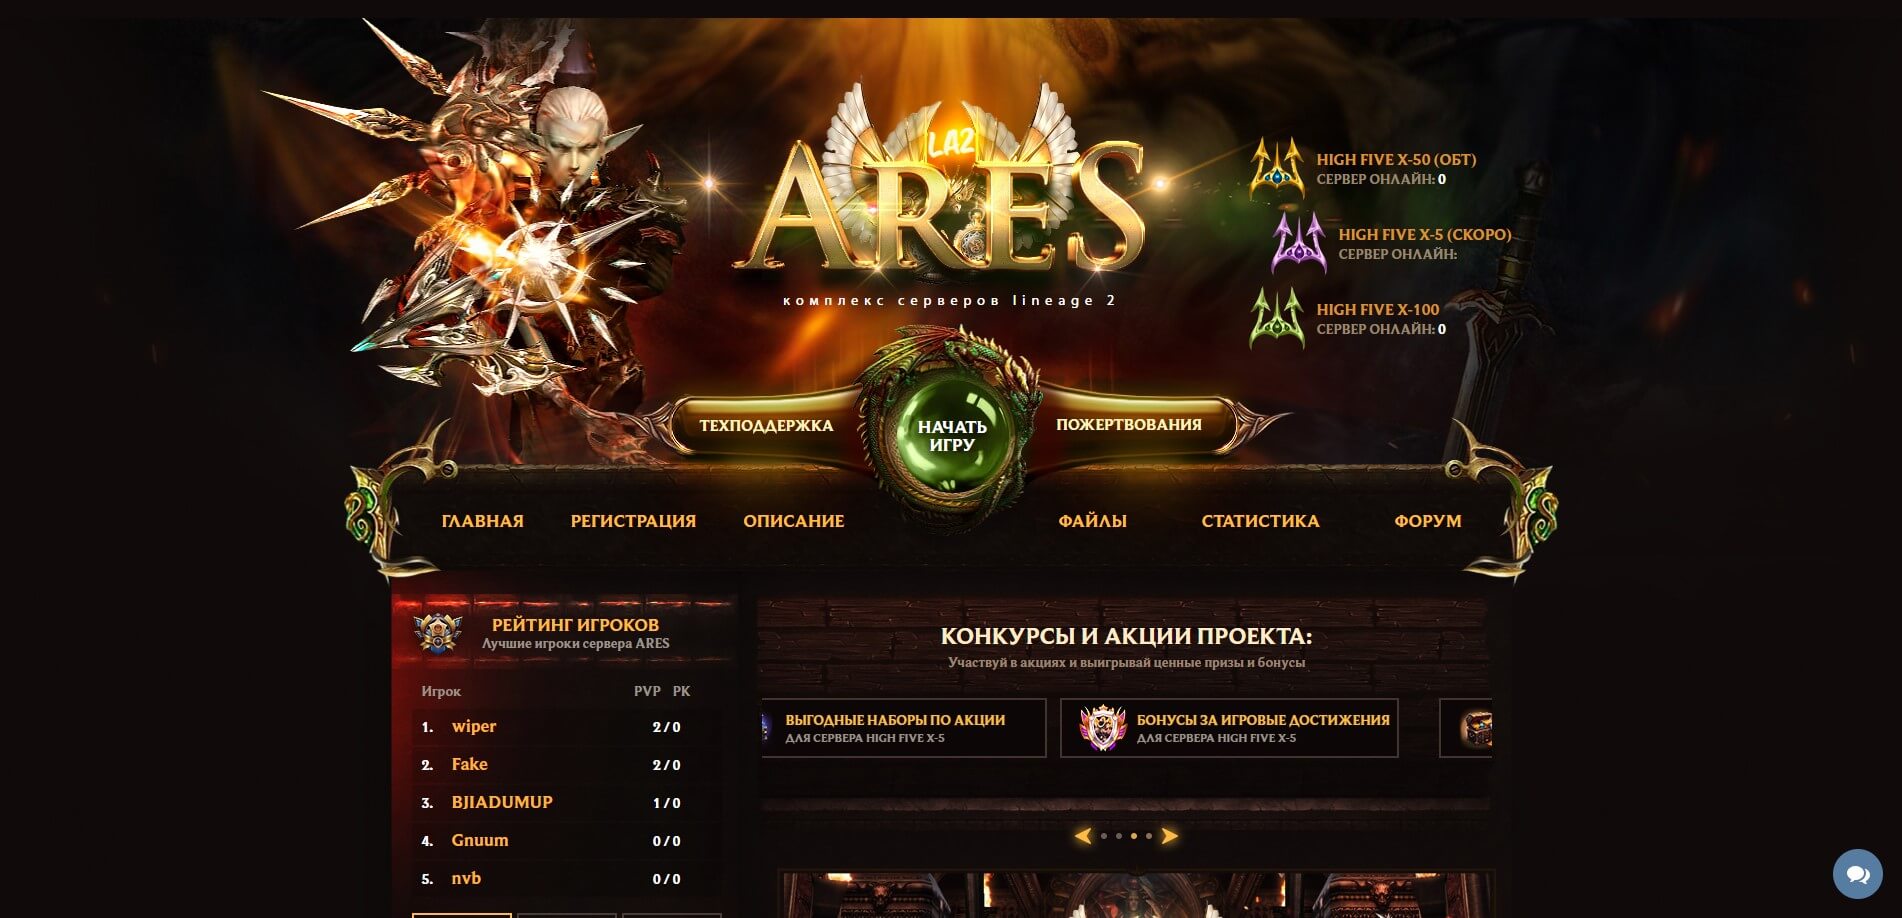 🌟🔥 Welcome to Lineage 2 High Five server with x50 rates on la2ares.com! Exciting adventures await you! 🔥🌟